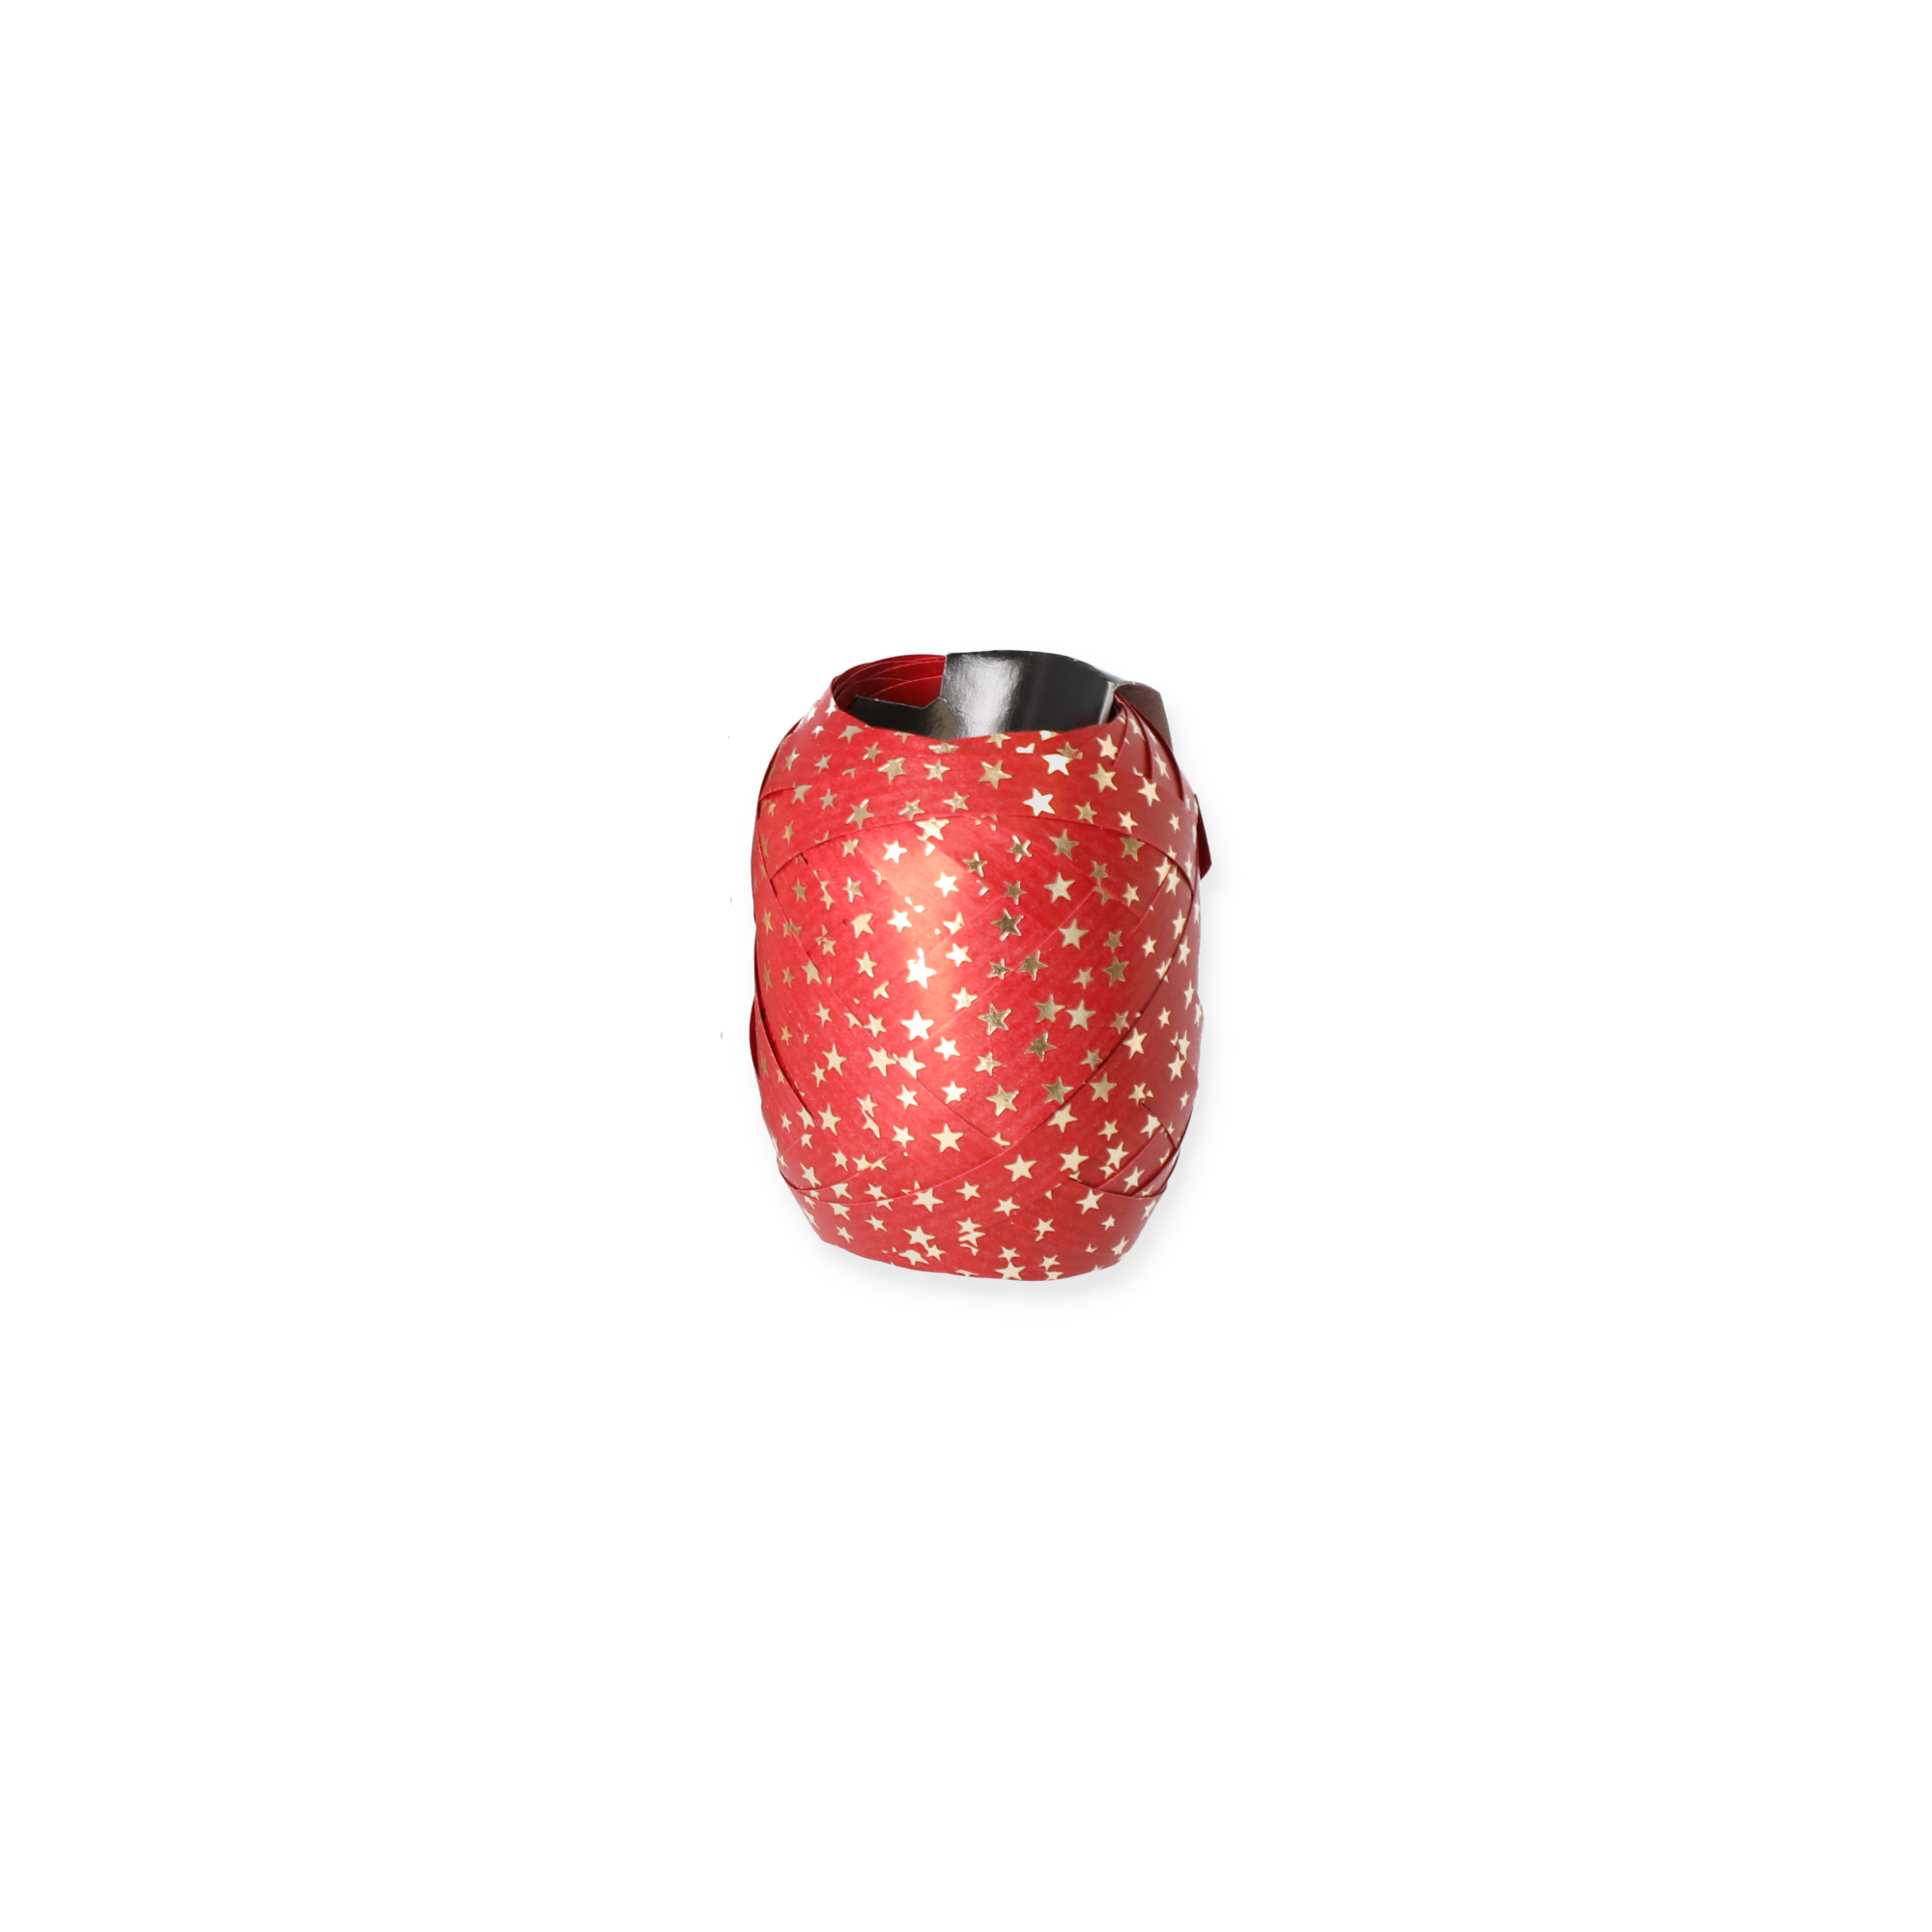 Geschenkband 'Nature Pack Stars' Baumwolle natur/rot 12 m + product picture